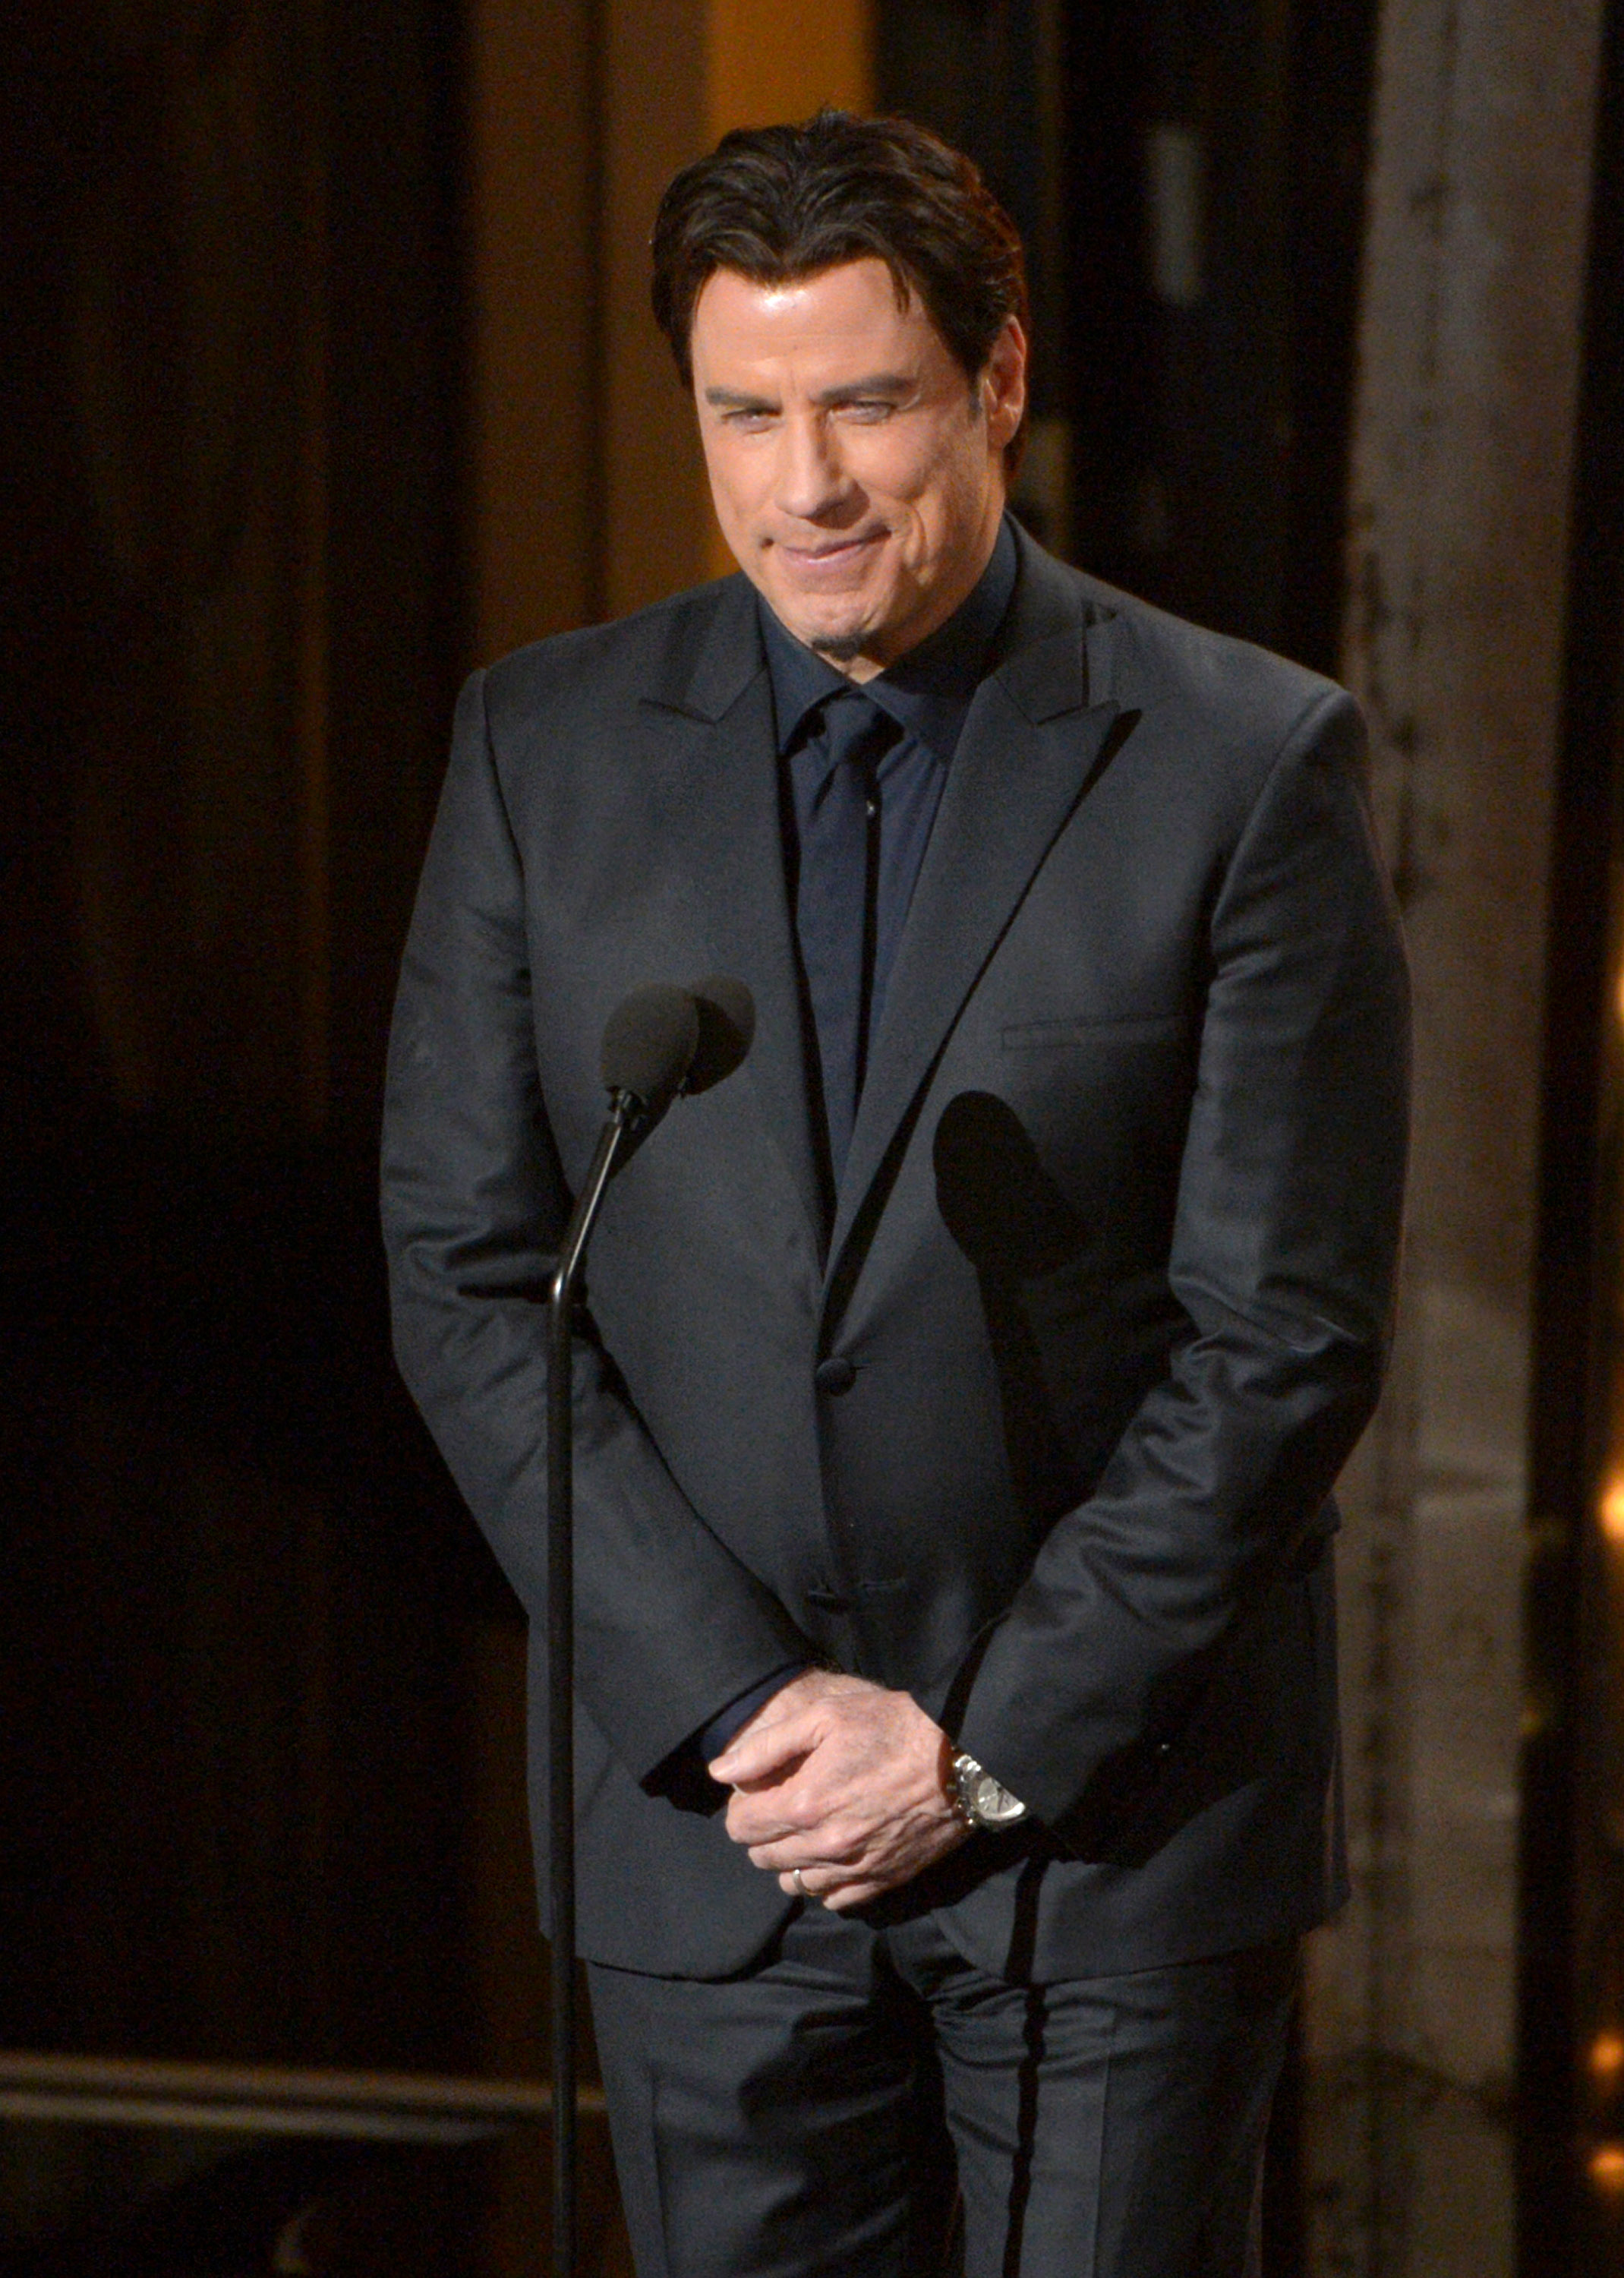 Presenter John Travolta speaks during the Oscars at the Dolby Theatre on Sunday, March 2, 2014, in Los Angeles.